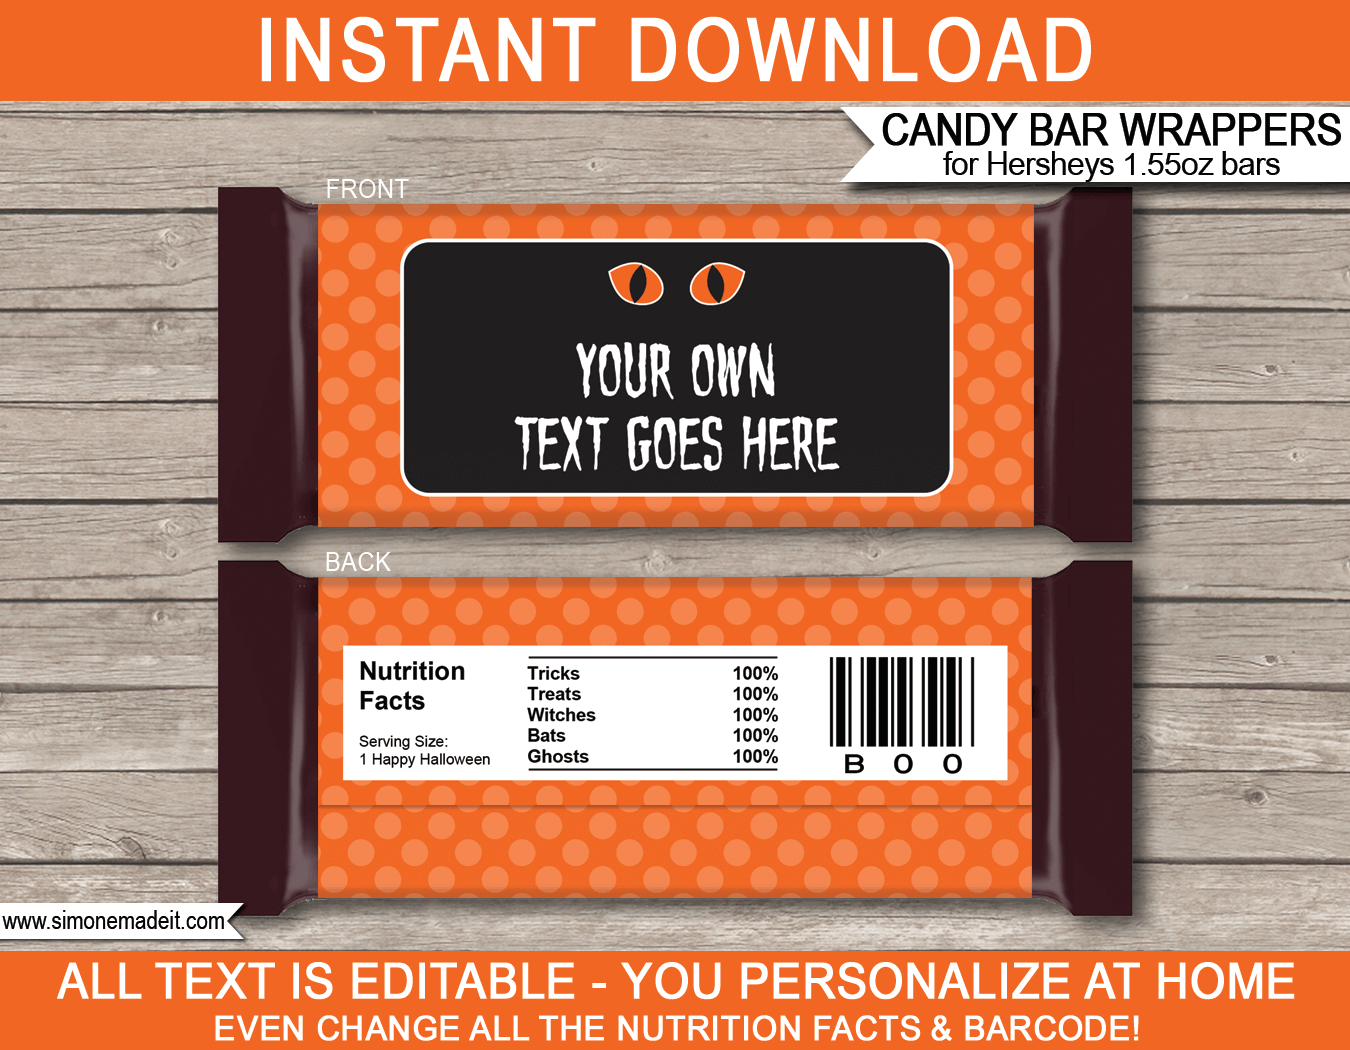 Halloween Hershey Candy Bar Wrappers | Halloween Favors | Personalized Candy Bars | Editable Template | INSTANT DOWNLOAD $3.00 via simonemadeit.com